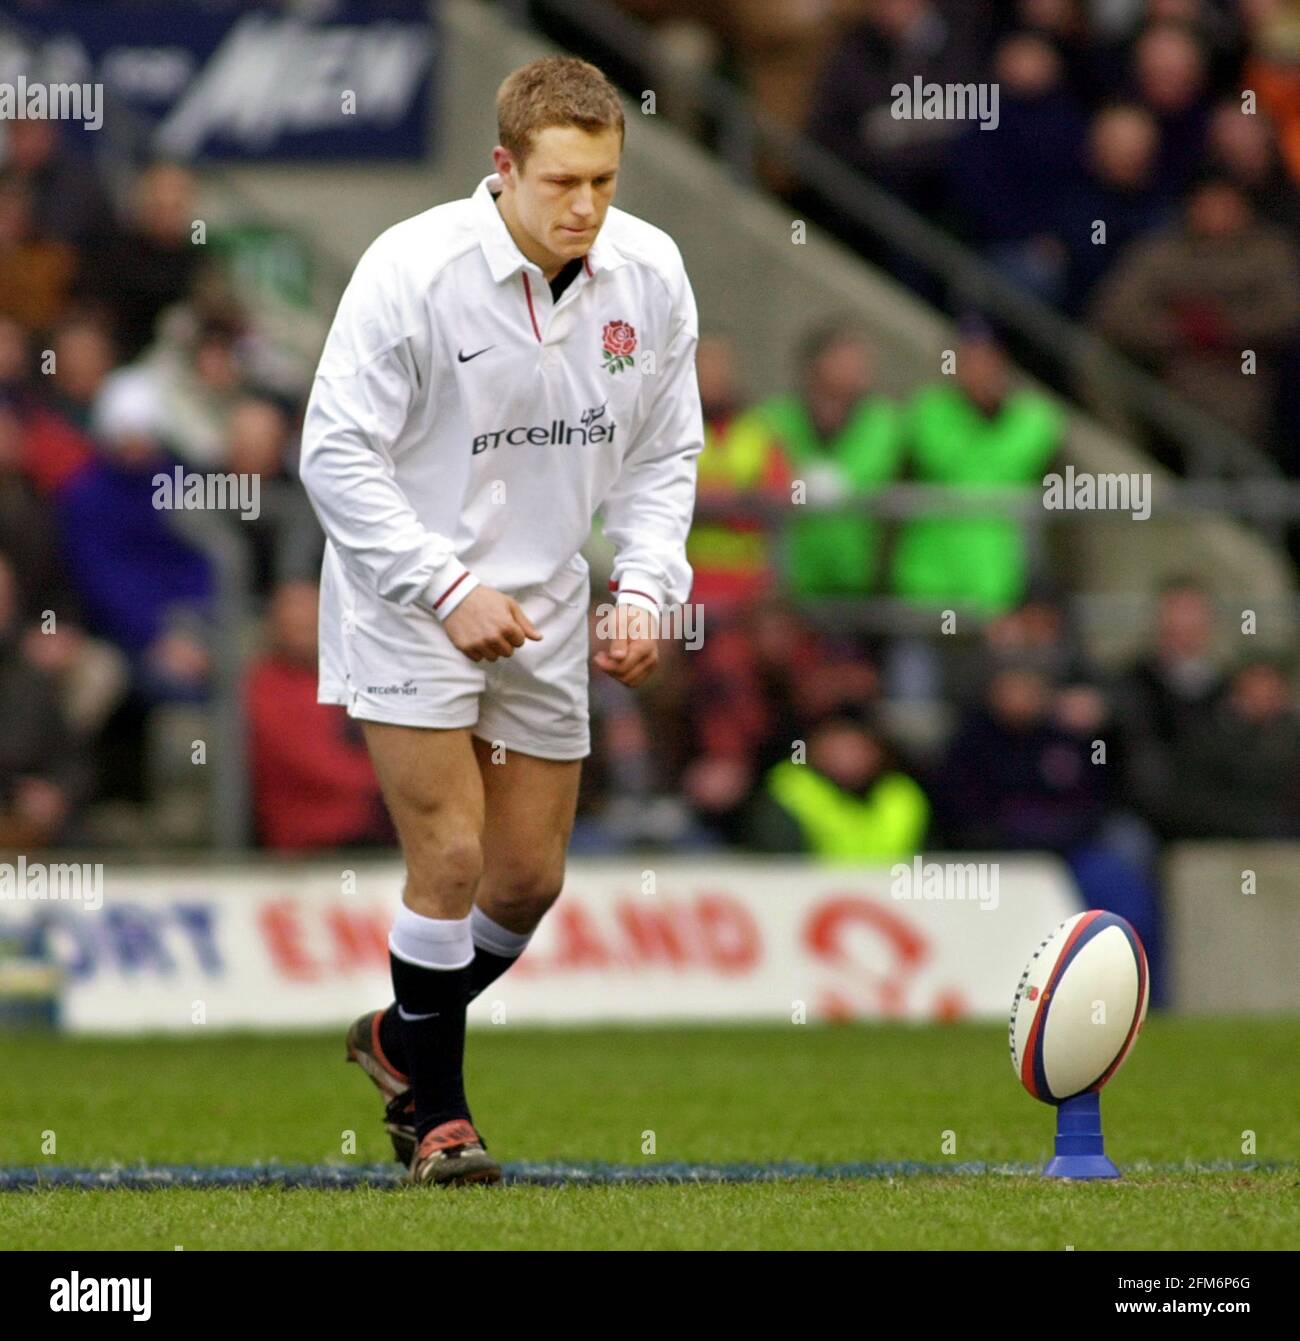 SIX NATIONS RUGBY UNION 2001 ANGLETERRE V ECOSSE MARS 2001 Banque D'Images